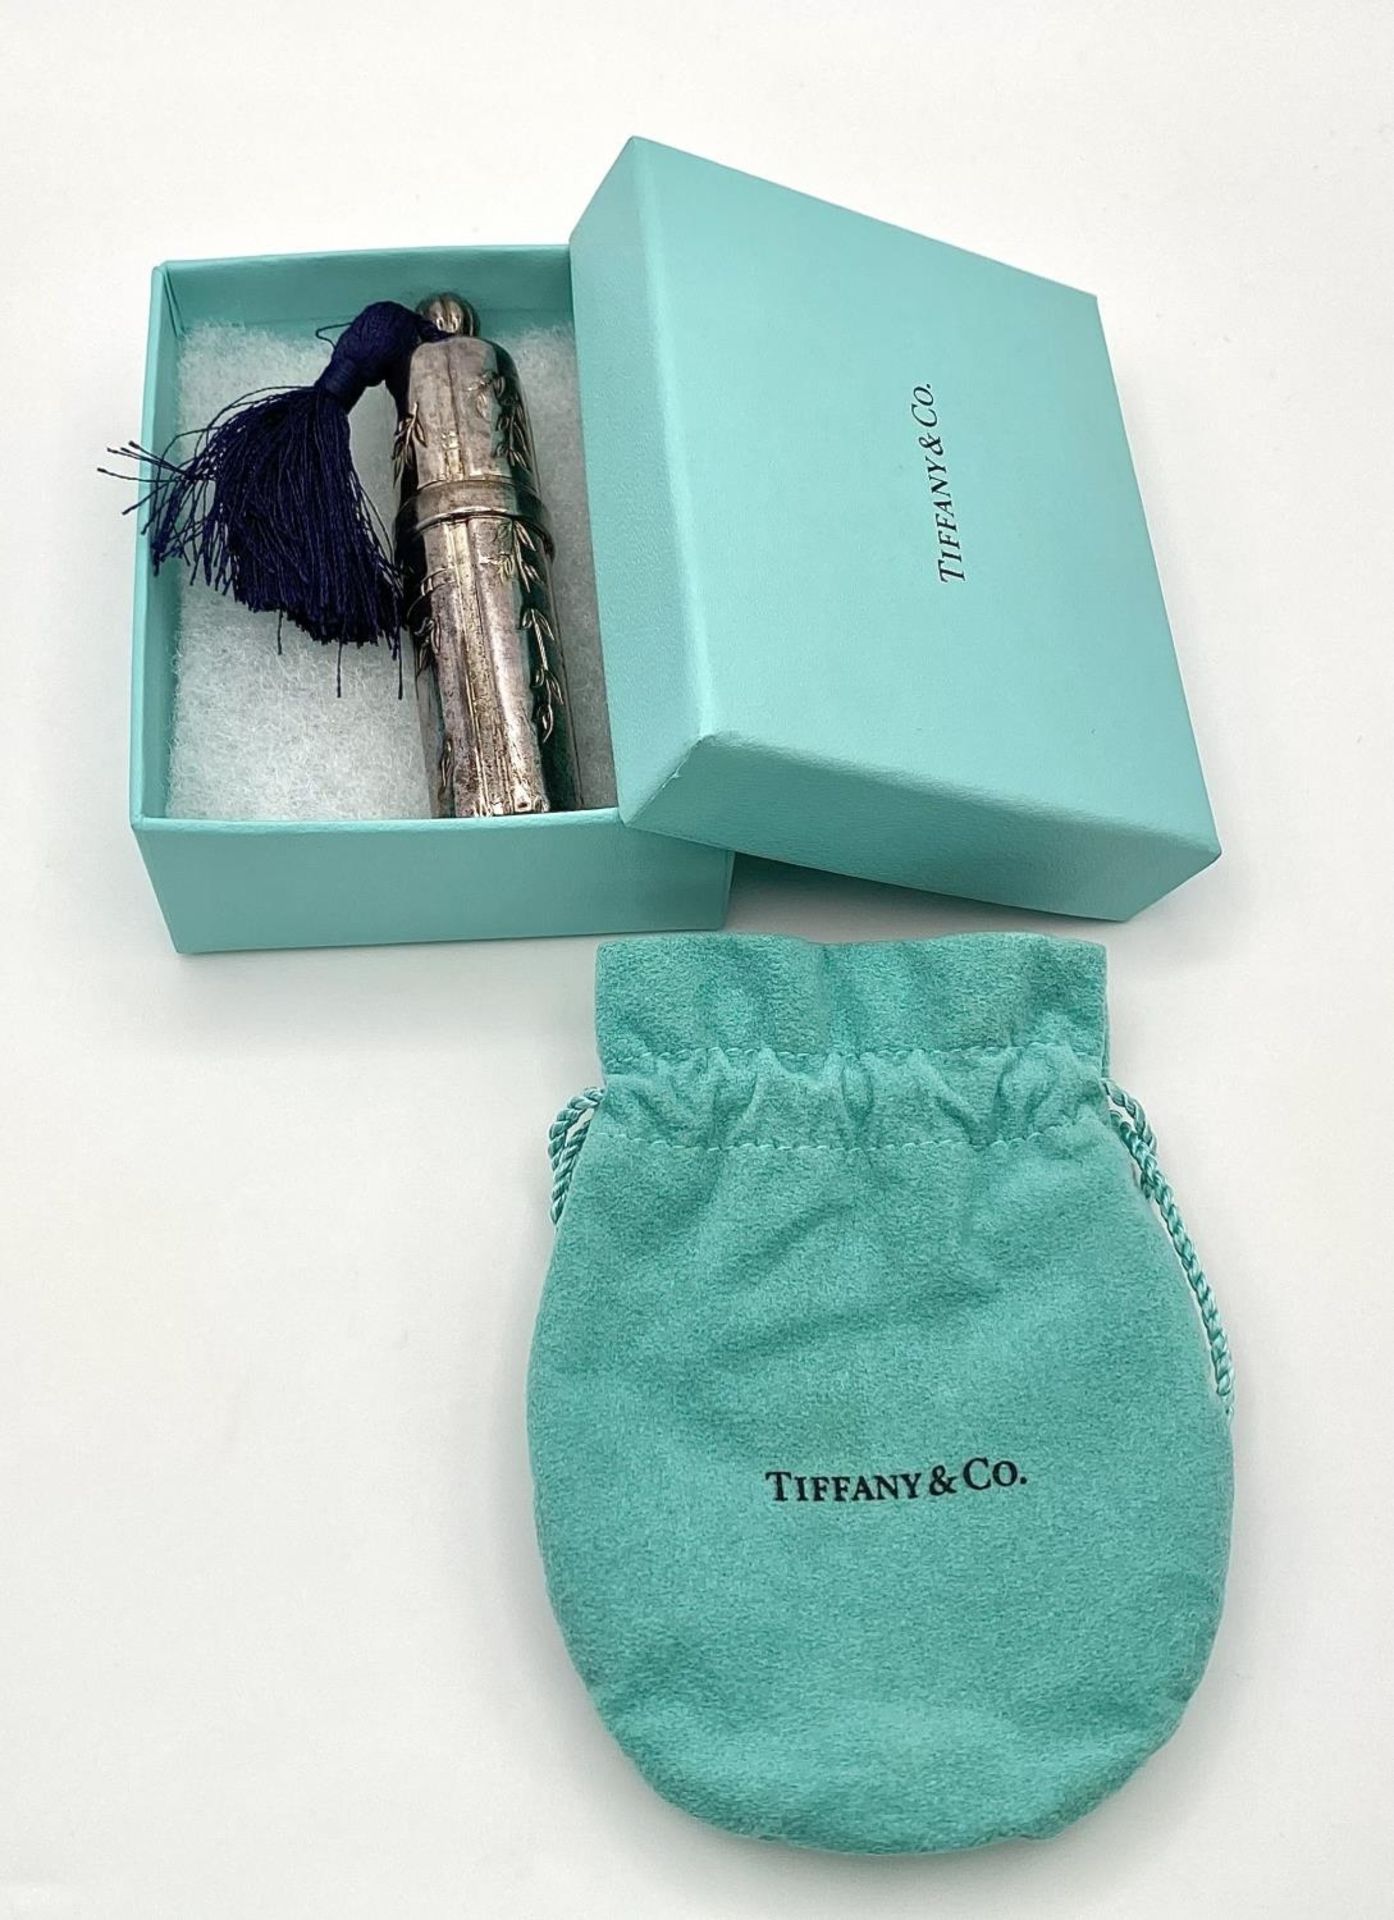 A TIFFANY & CO sterling silver perfume bottle with original pouch and presentation box. - Bild 3 aus 4